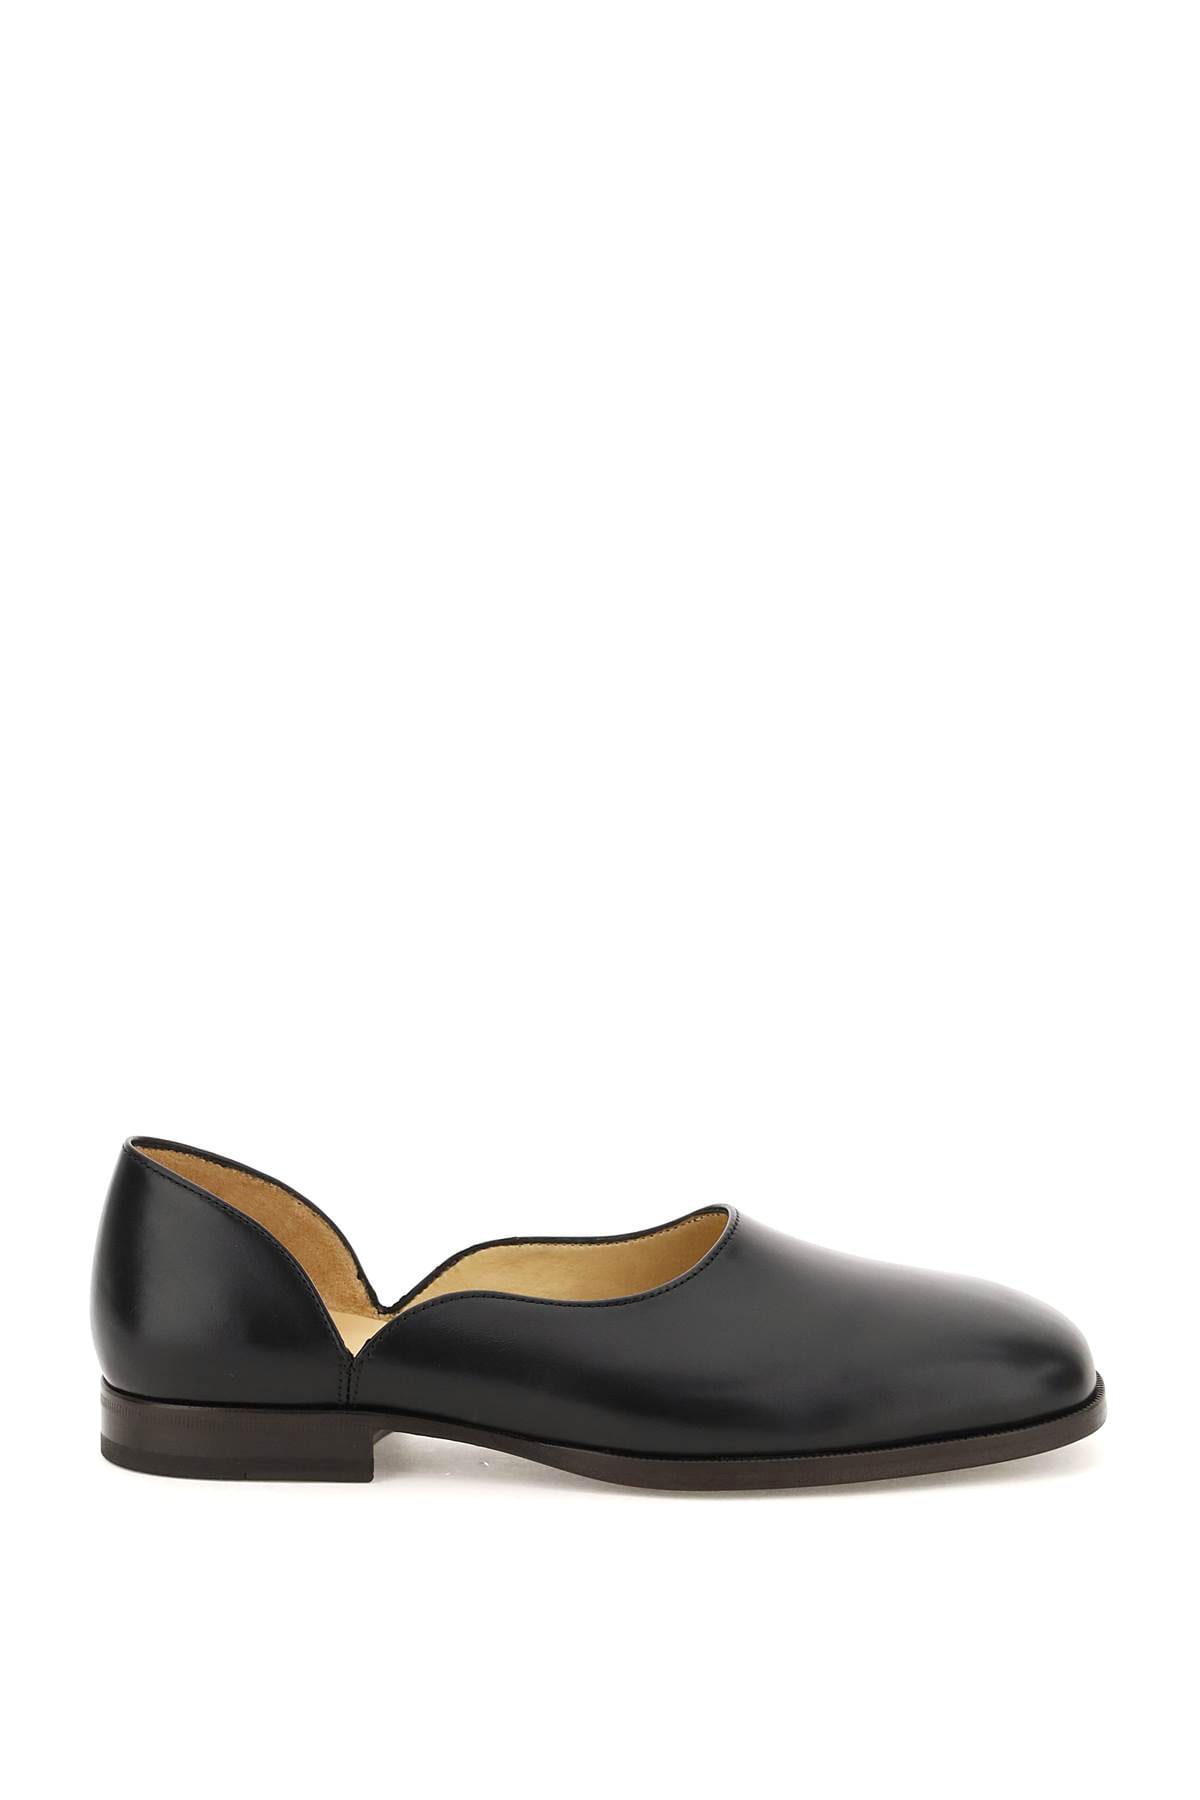 LEMAIRE Shoes for Women | ModeSens